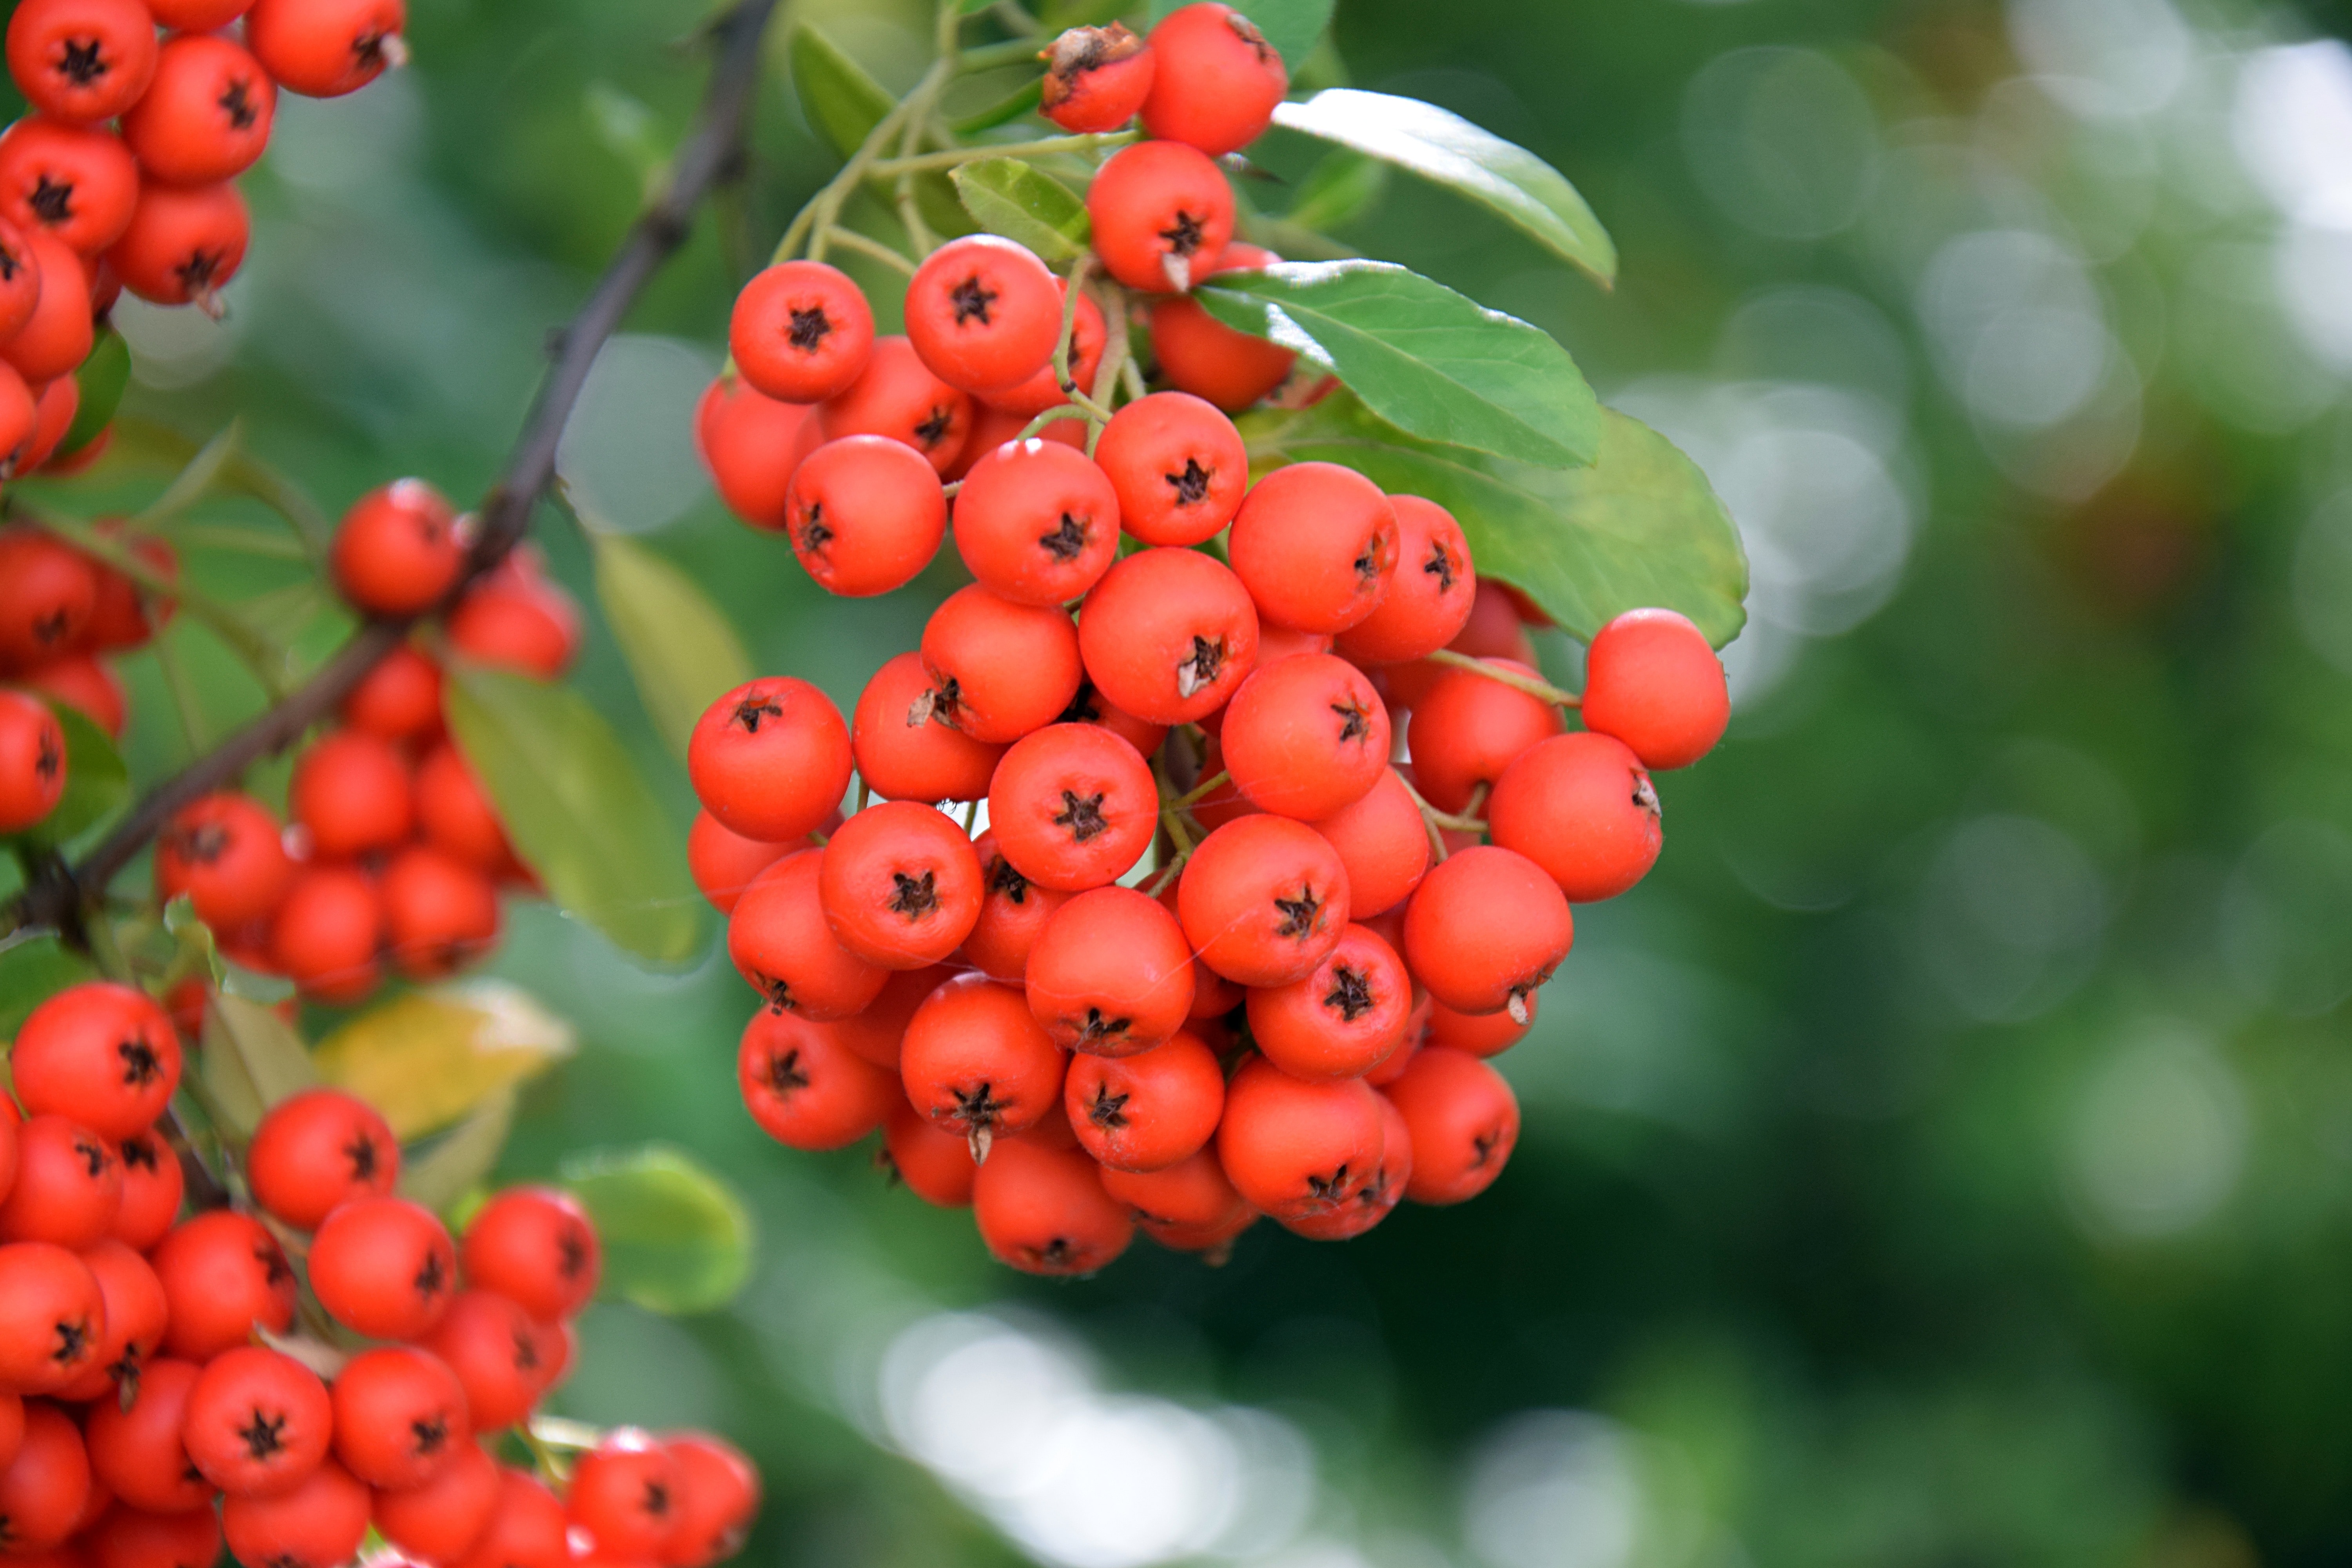 bunch of red  round fruits